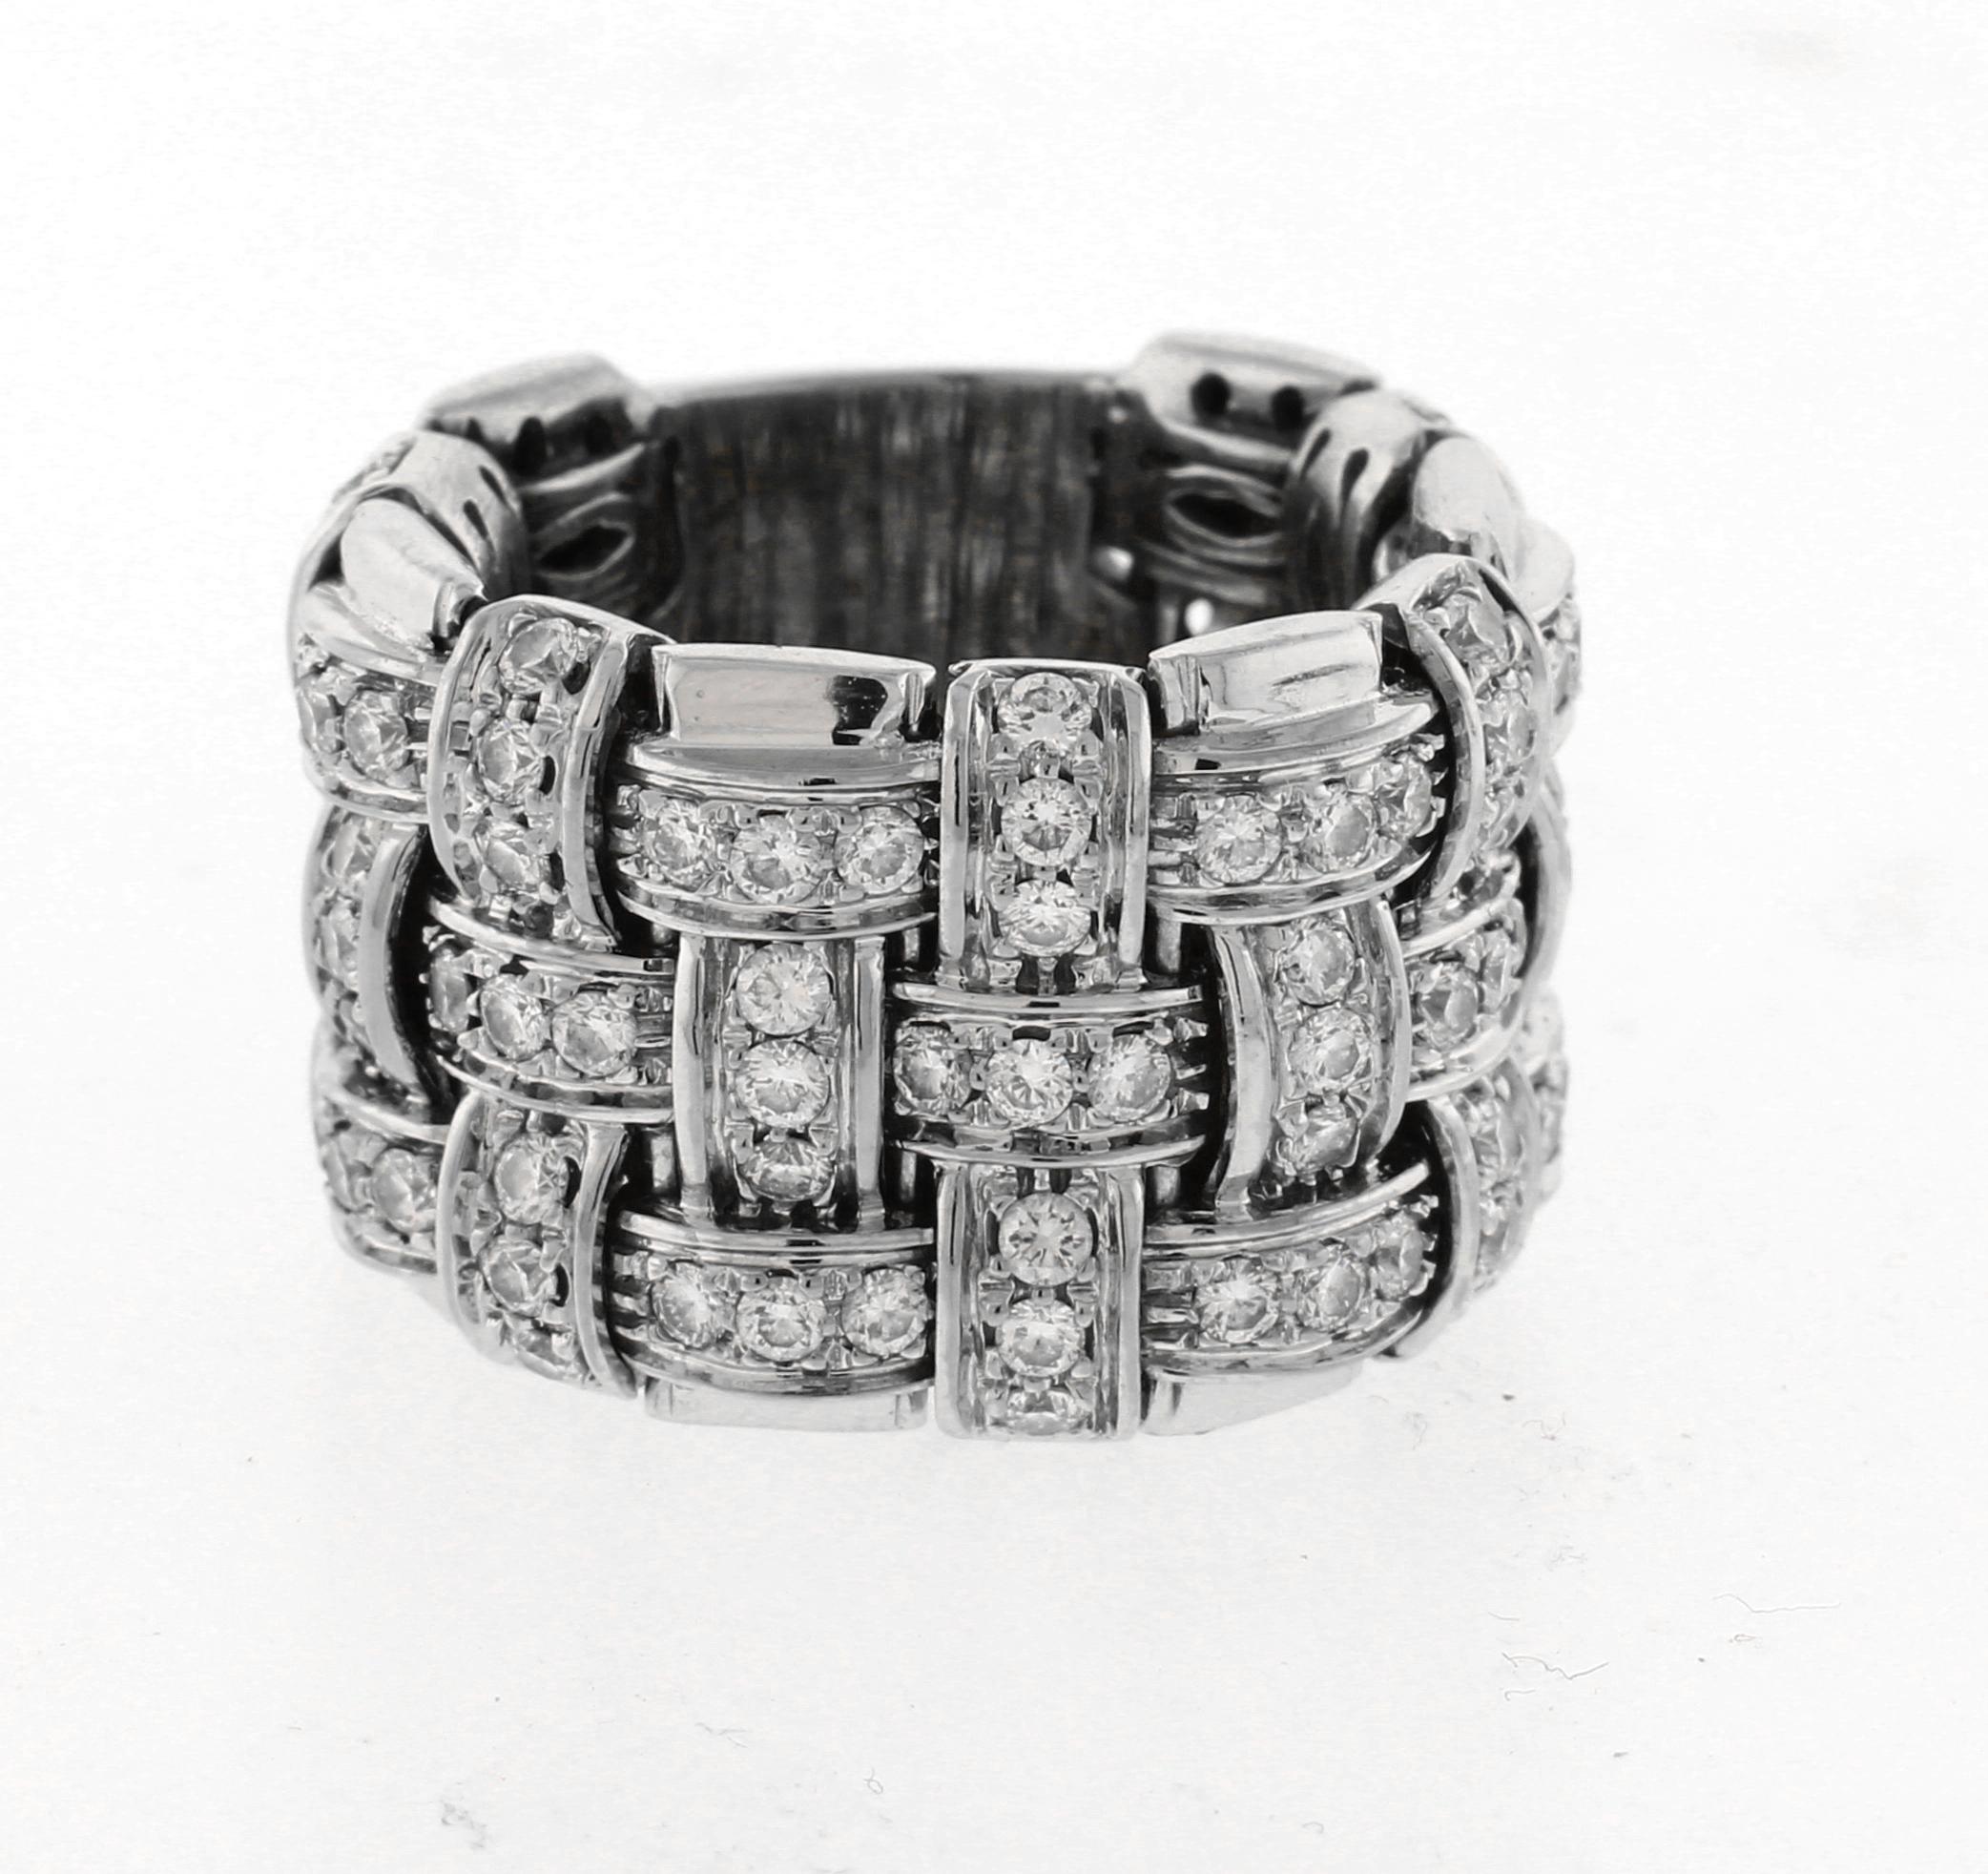 From Robert Coin, this ring is from the Appassionata collection.  The ring features 99 round brilliant cut diamonds approximately 1.75 carat. 
♦ Designer: Roberto Coin
♦ Metal: 18kt White gold
♦ Size: 4 1/4, can be resized slightly
♦ Gemstone: